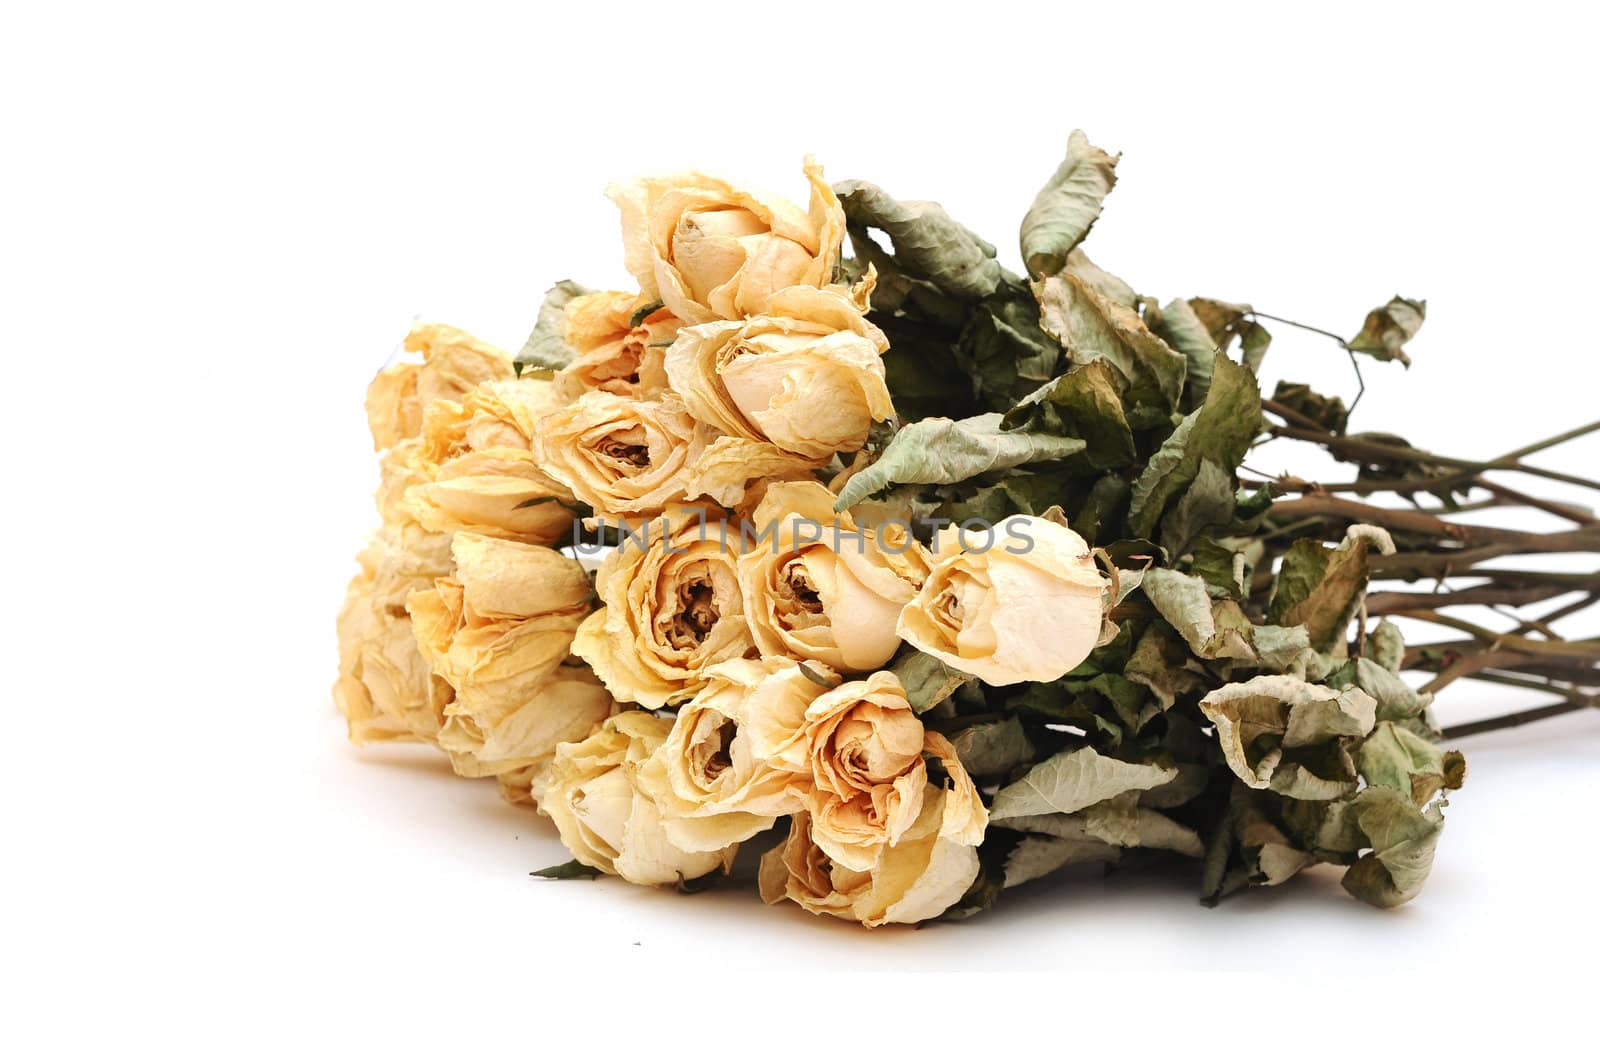 dry roses on a white background 